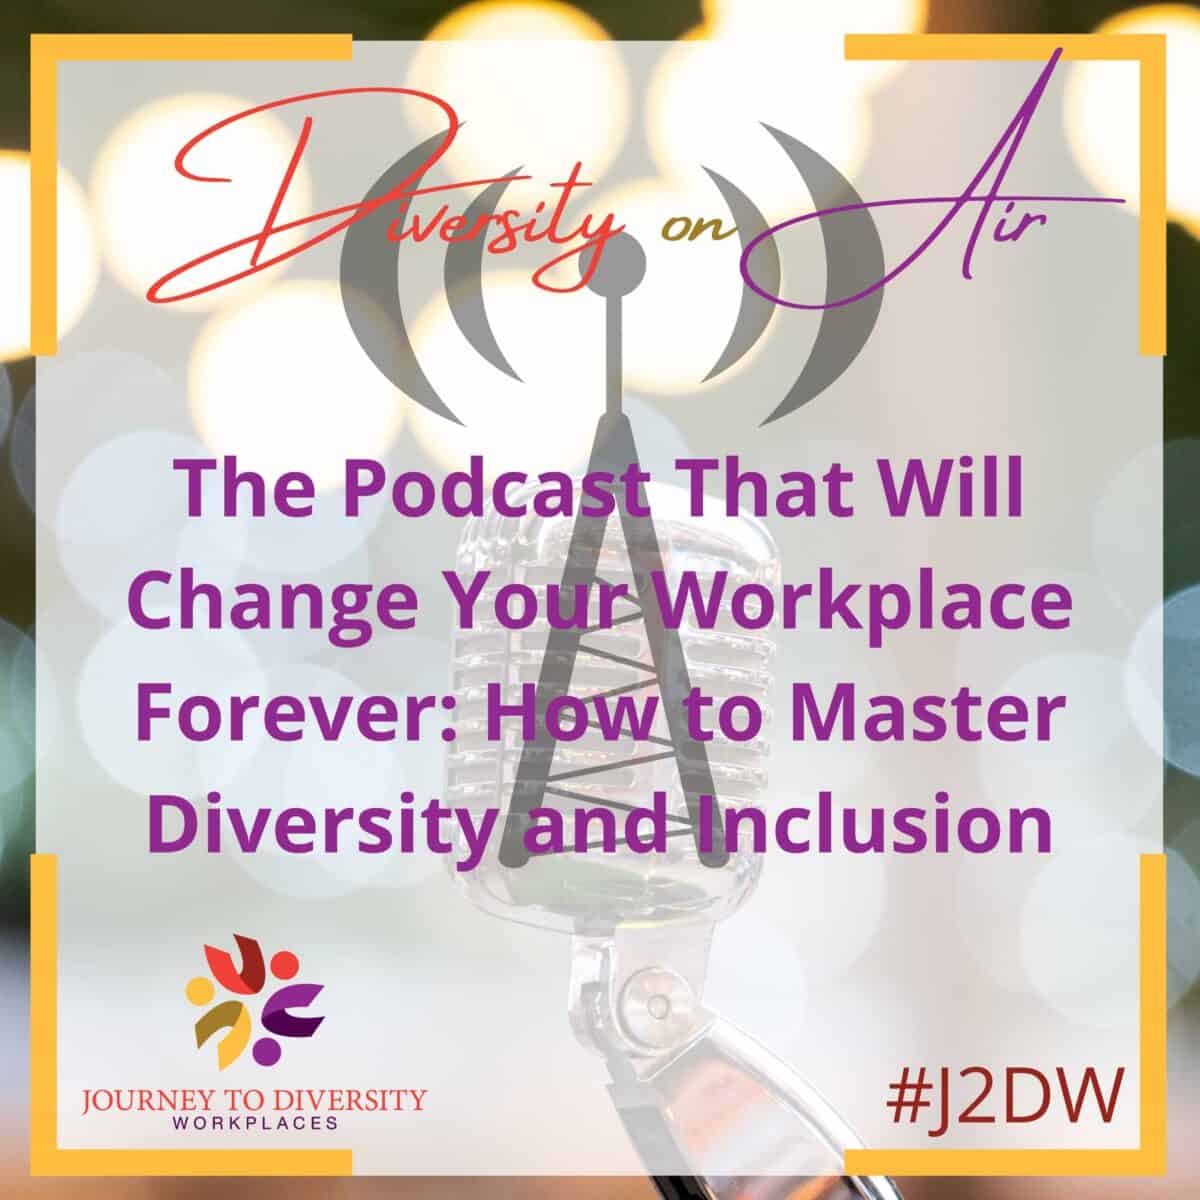 The Podcast That Will Change Your Workplace Forever: How to Master Diversity and Inclusion